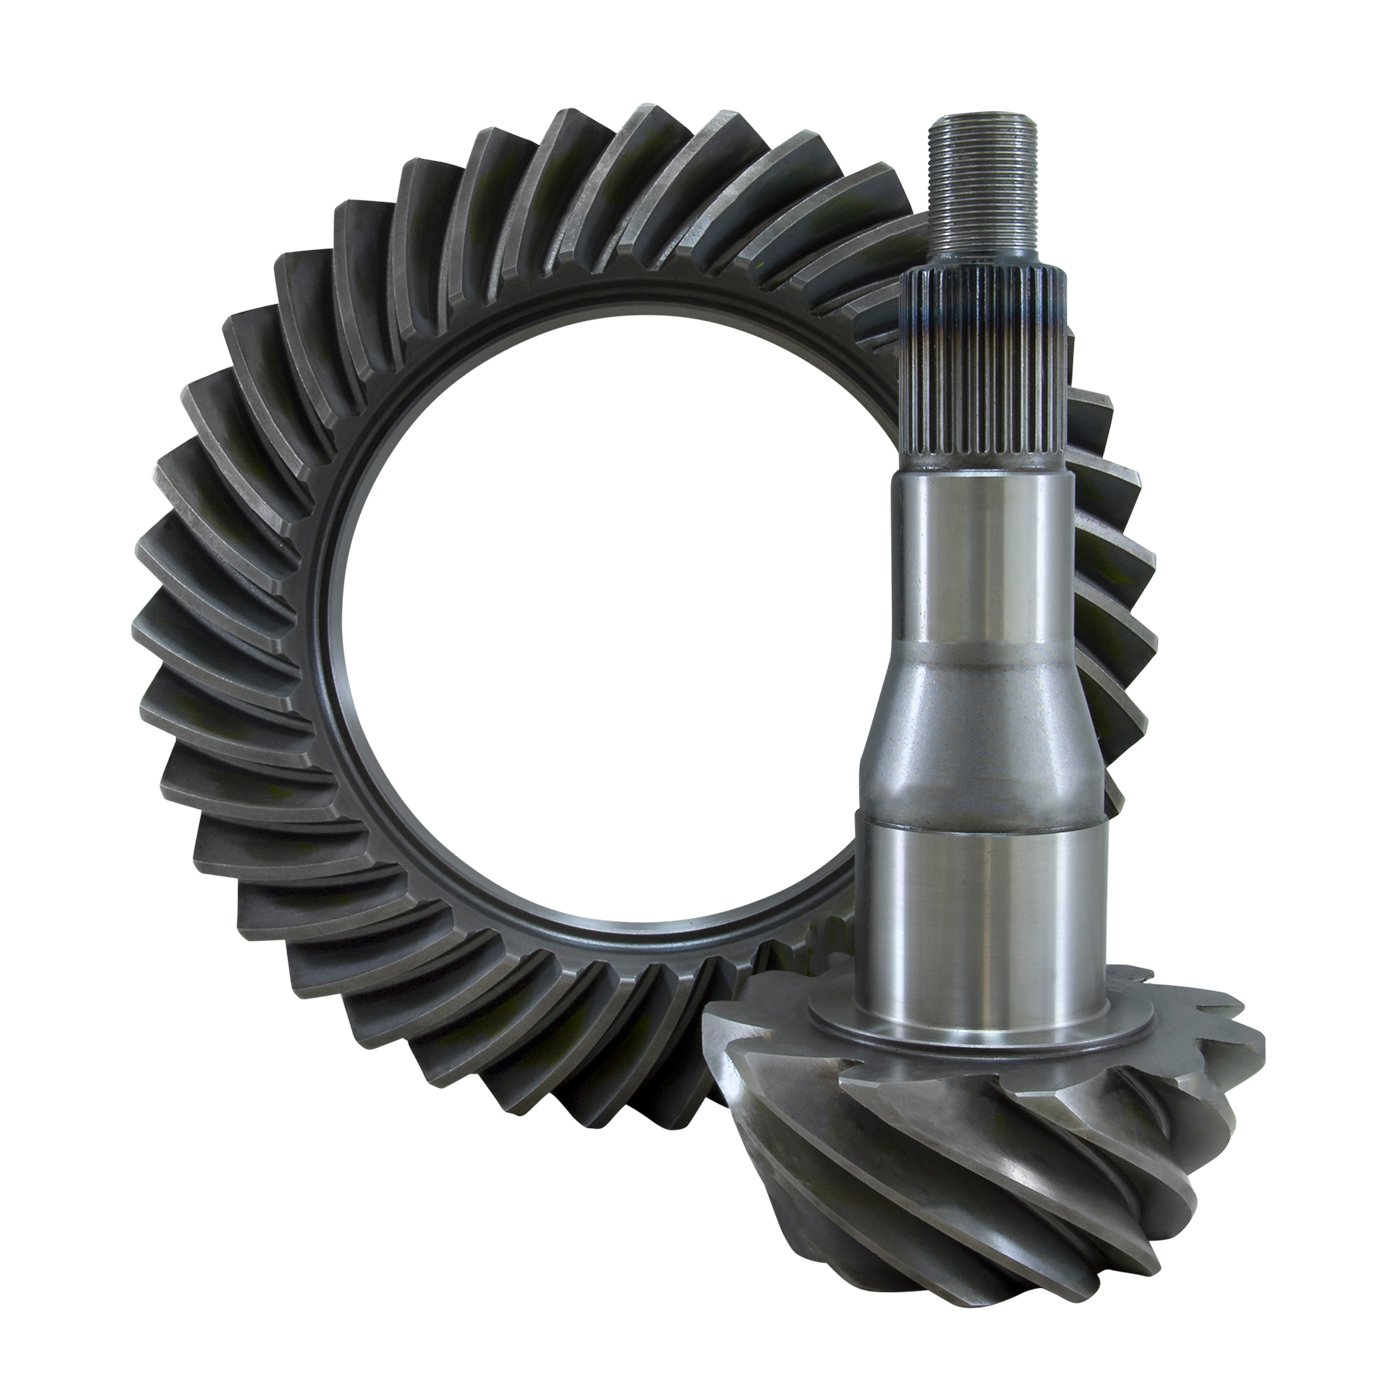 USA Standard 36296 Ring & Pinion Gear Set, For '11 & Up Ford 9.75 in., 4.56 Ratio